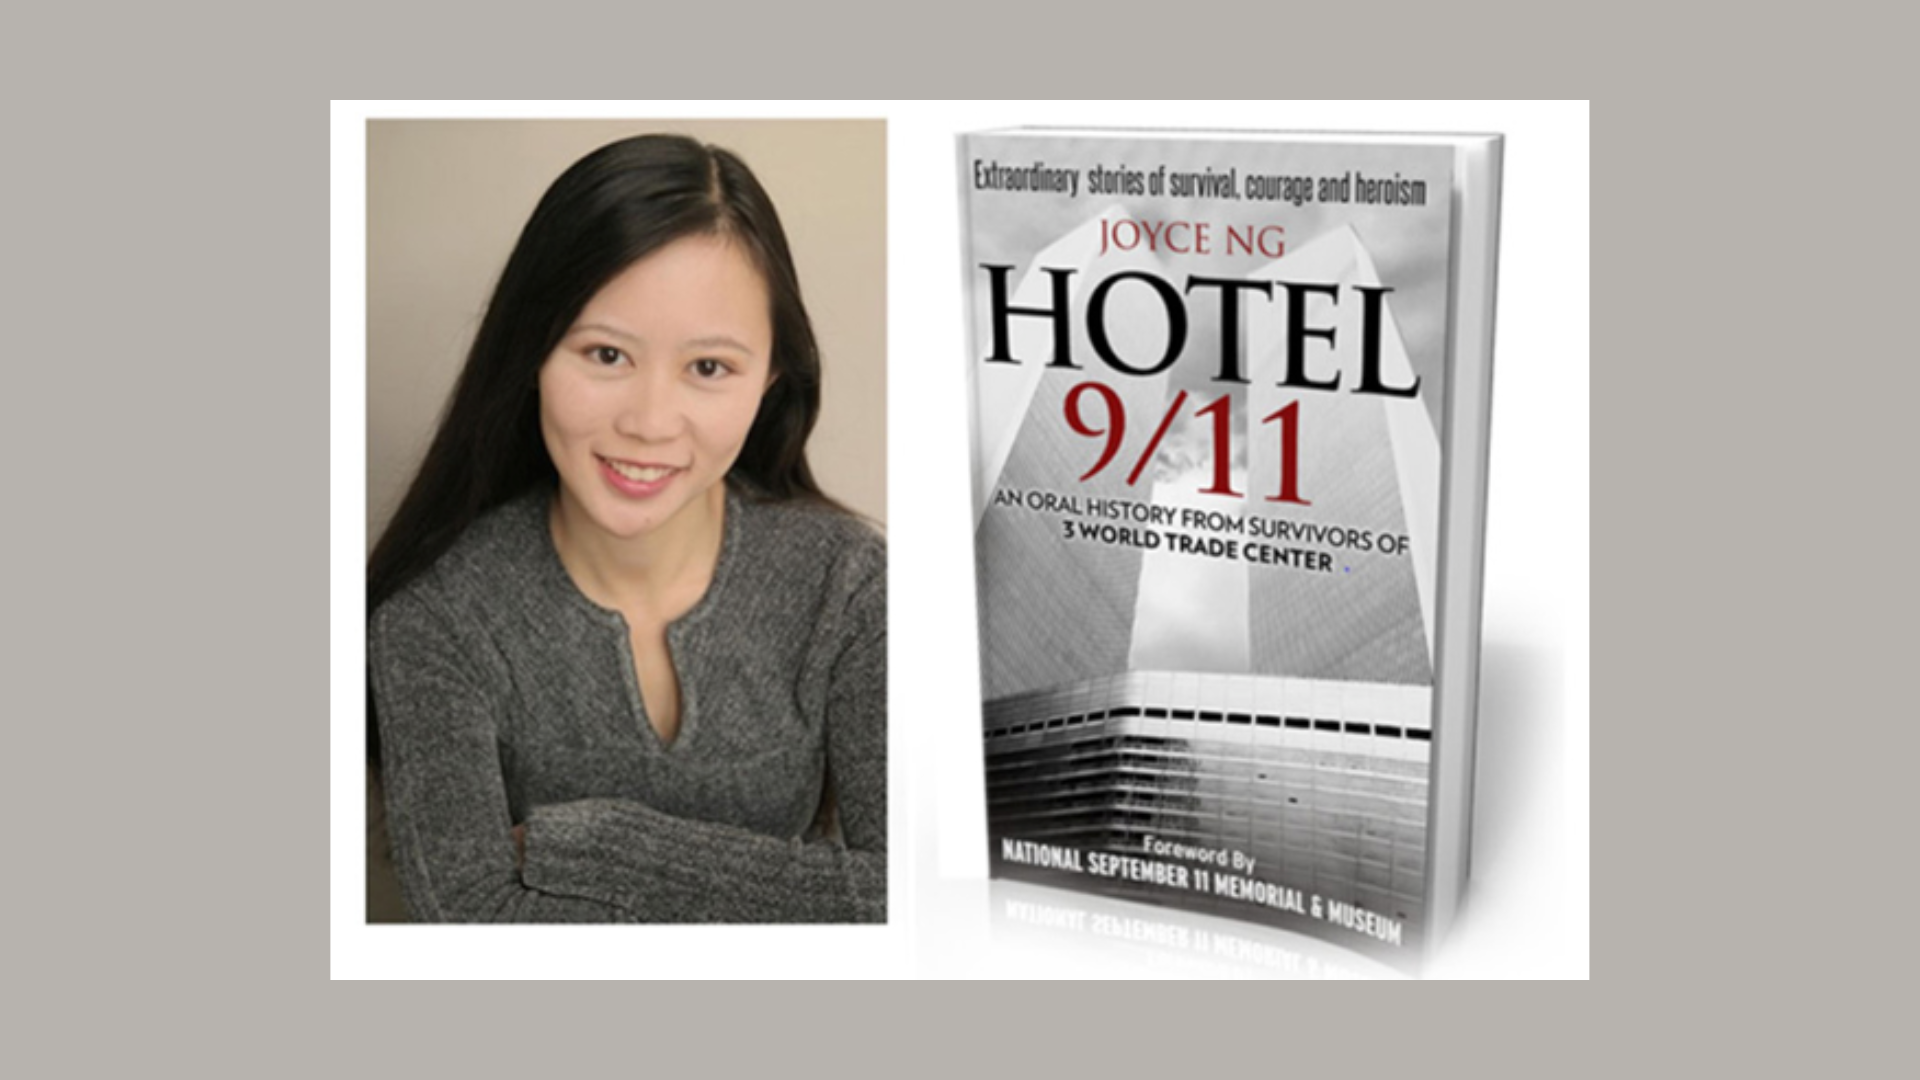 Headshot of the author, a woman with long dark hair wearing a gray sweater (left); cover of a book entitled "Hotel 9/11" (right)